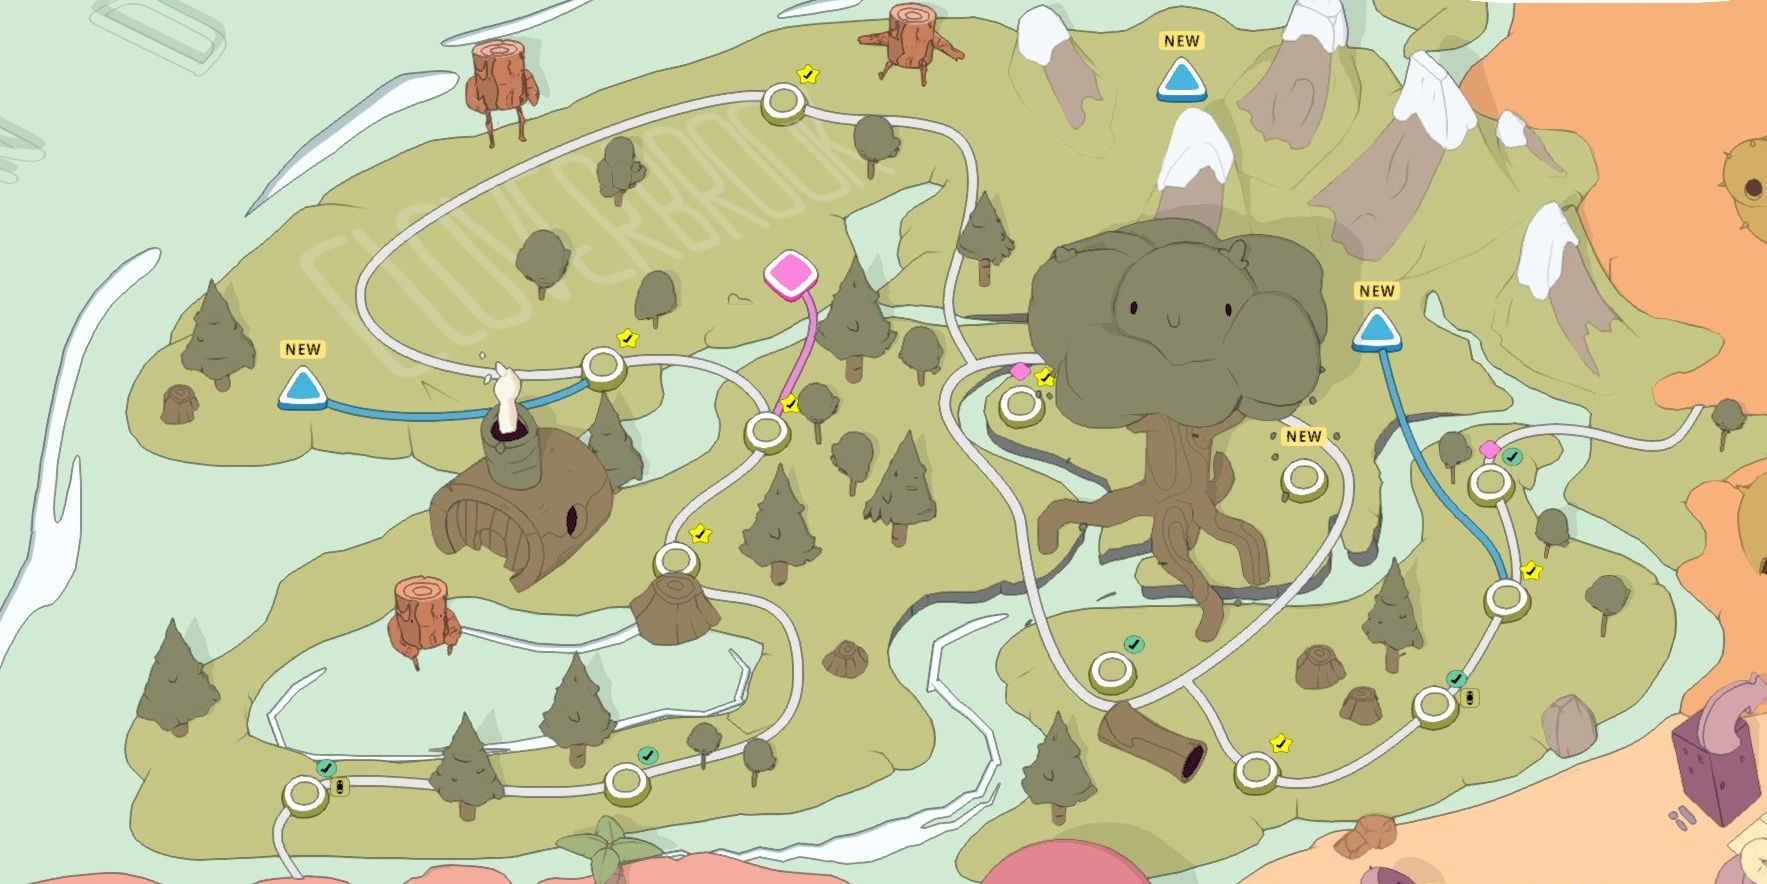 The forest world map in OlliOlli World